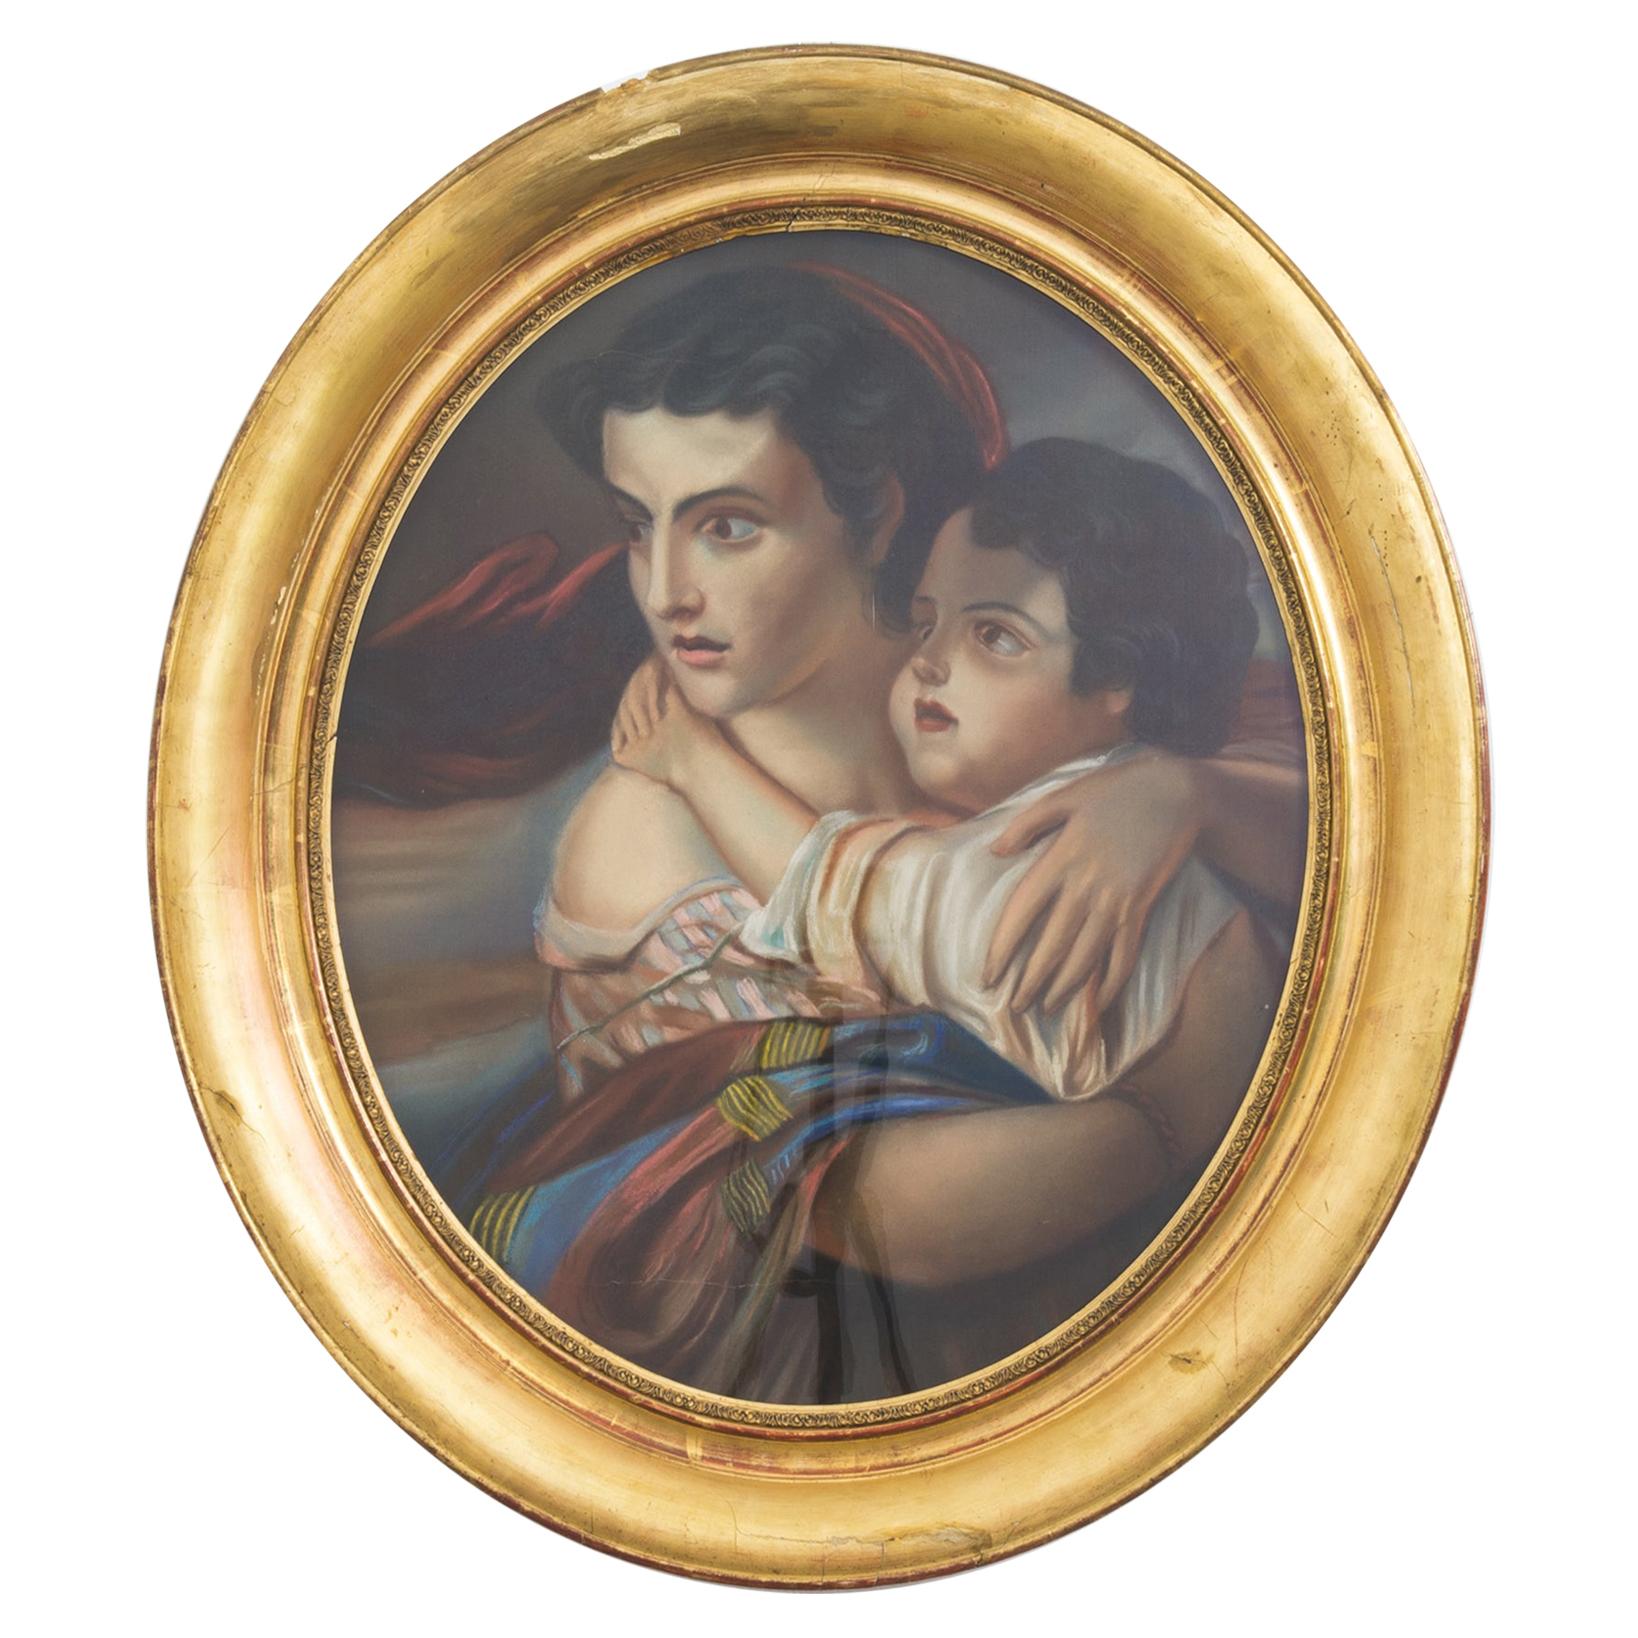 1880s French Painting in Wooden Frame